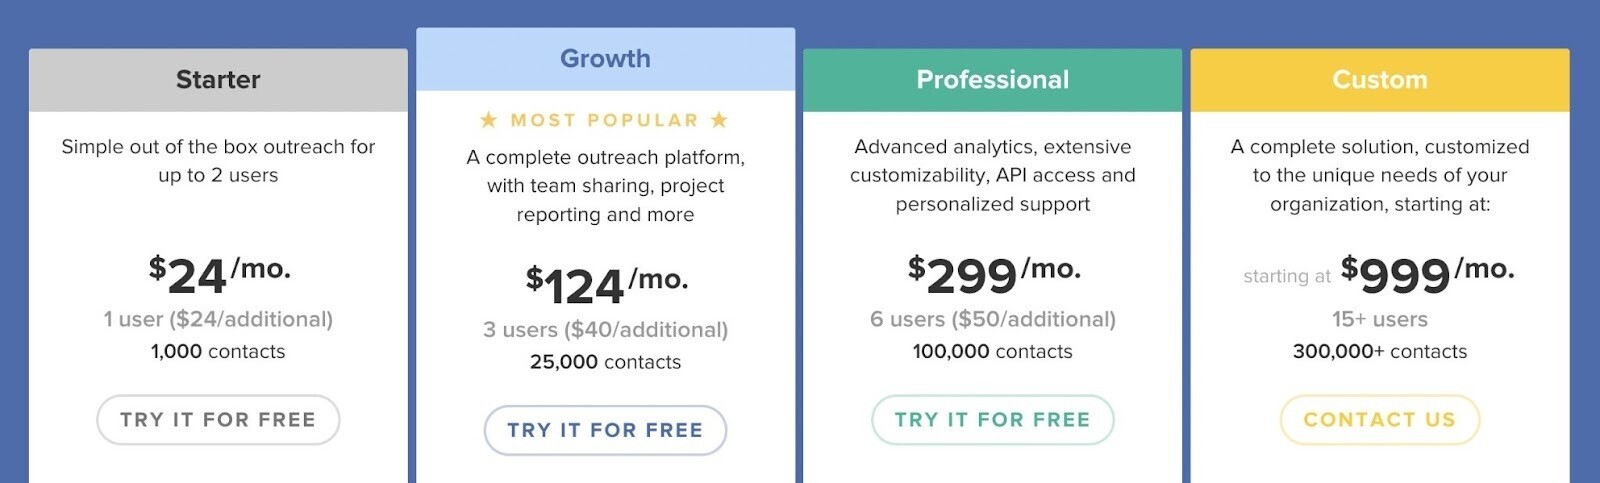 BuzzStream’s pricing page showing prices for Starter, Growth, Professional and Custom plans